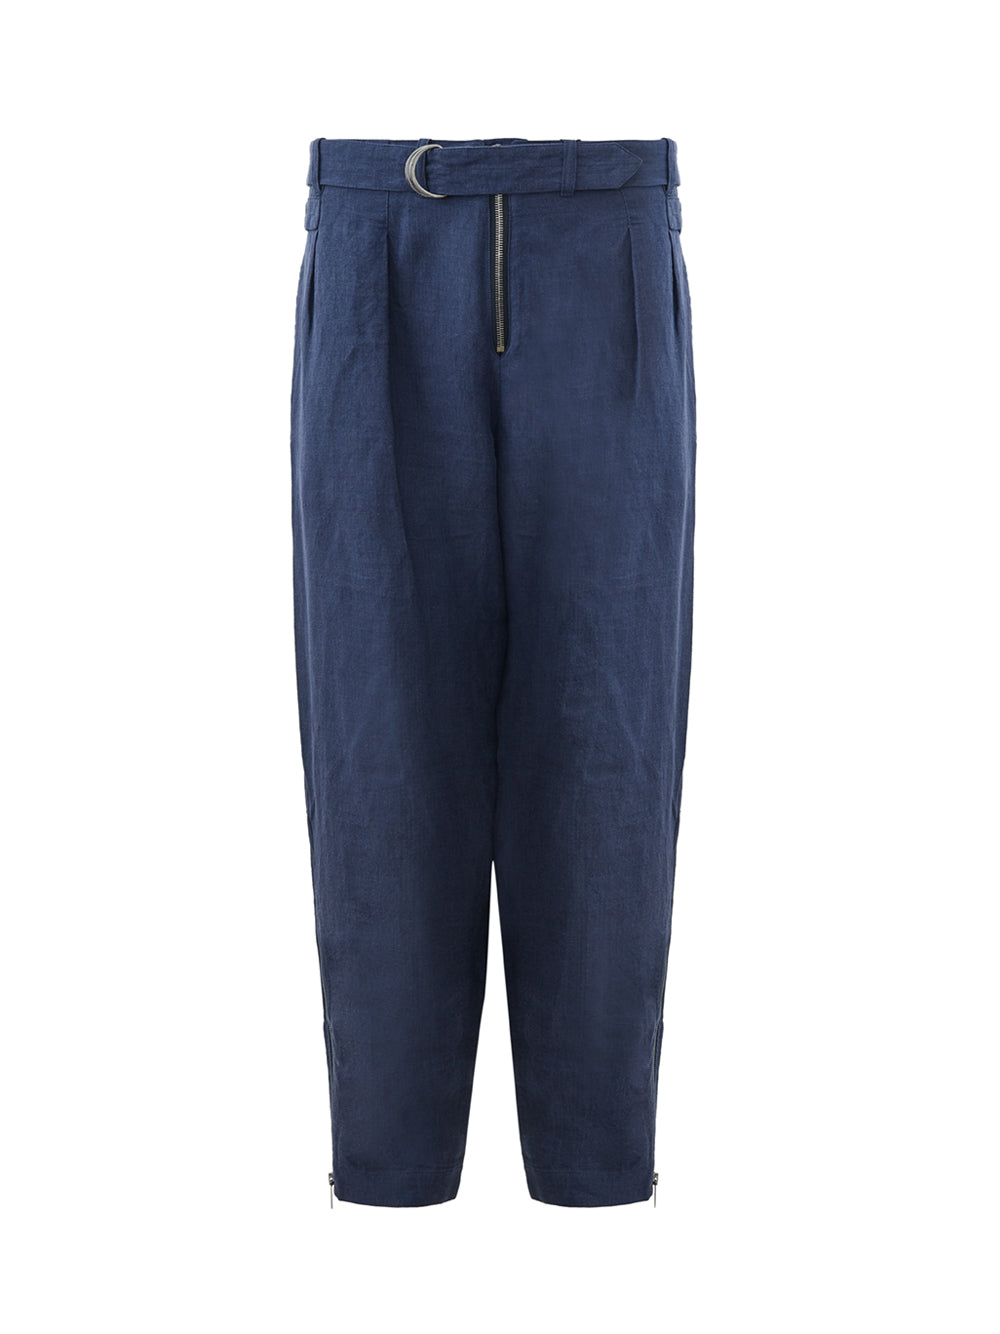 Relaxed Fit trousers in Emporio Armani linen